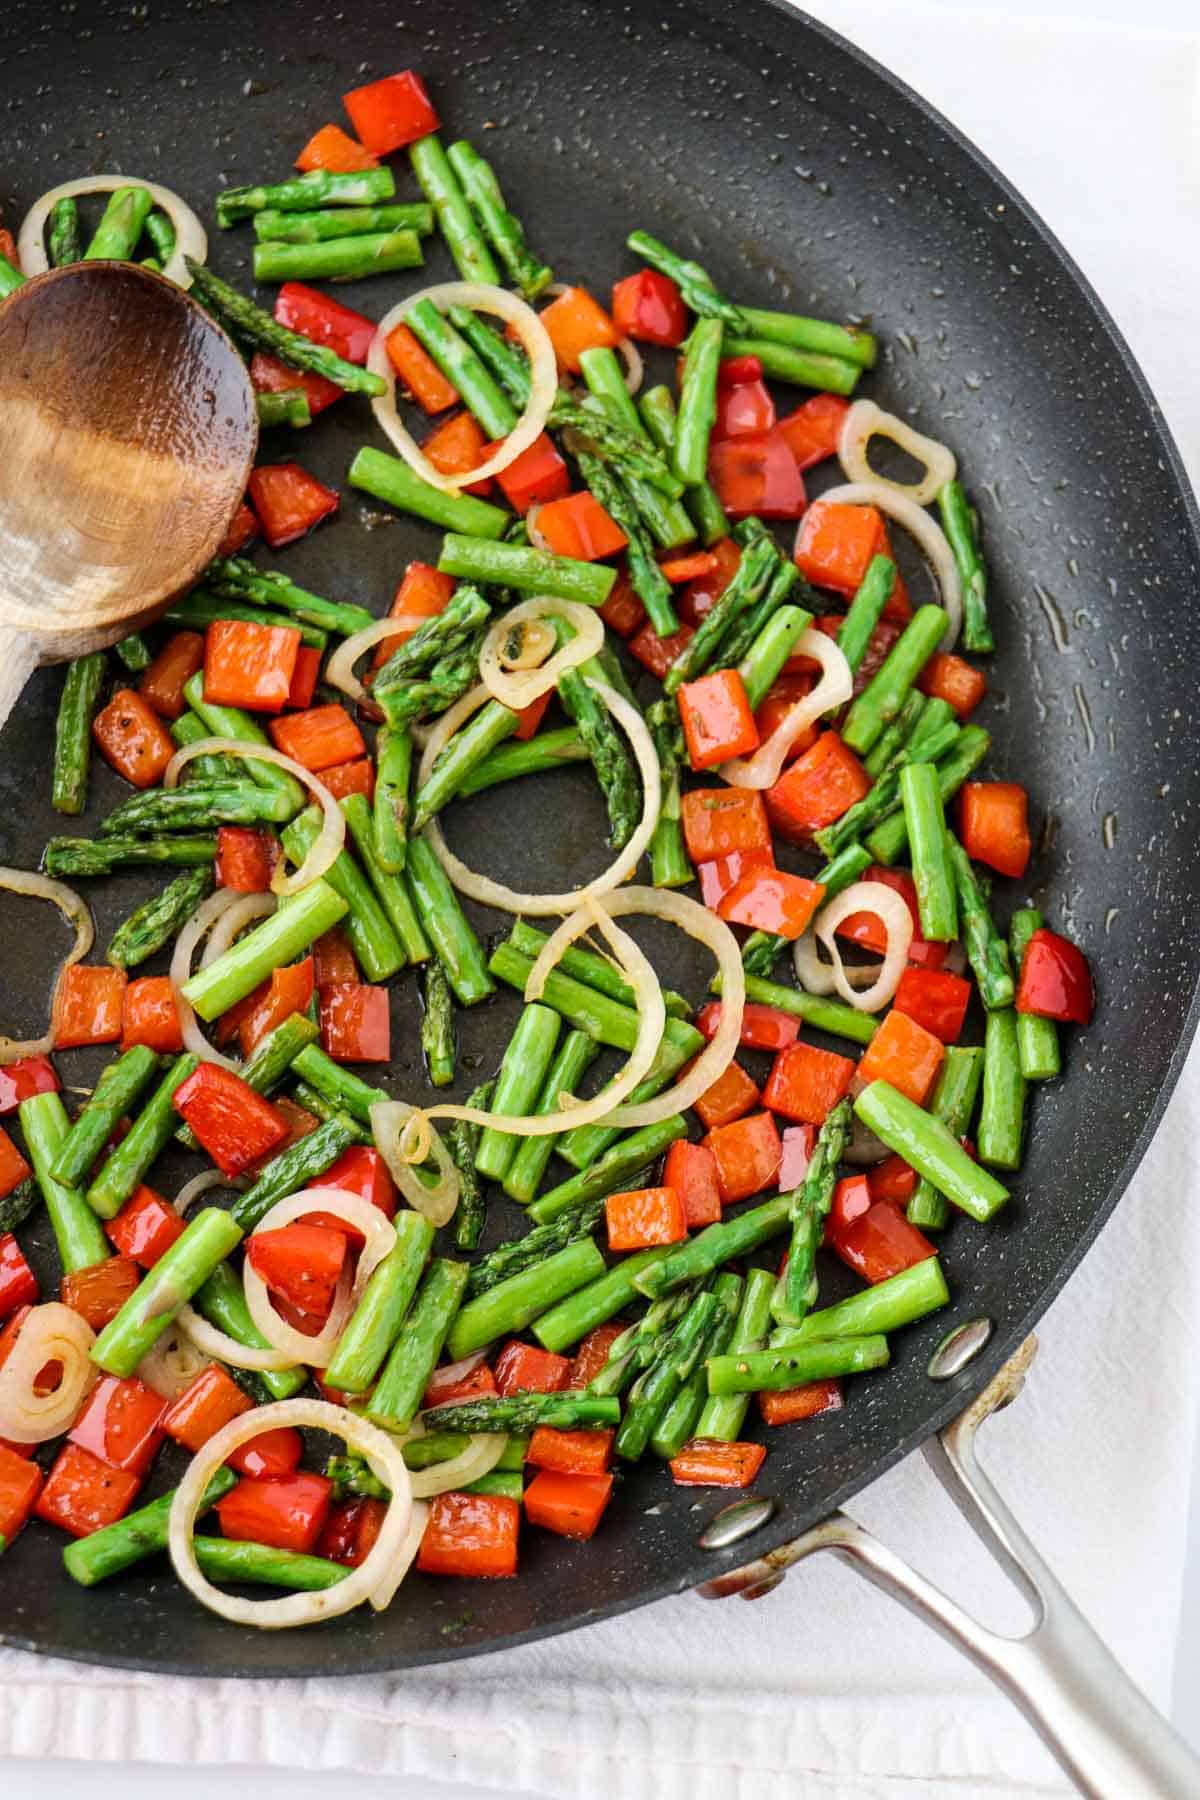 Red pepper, asparagus and shallot in a skillet with a wooden spoon.